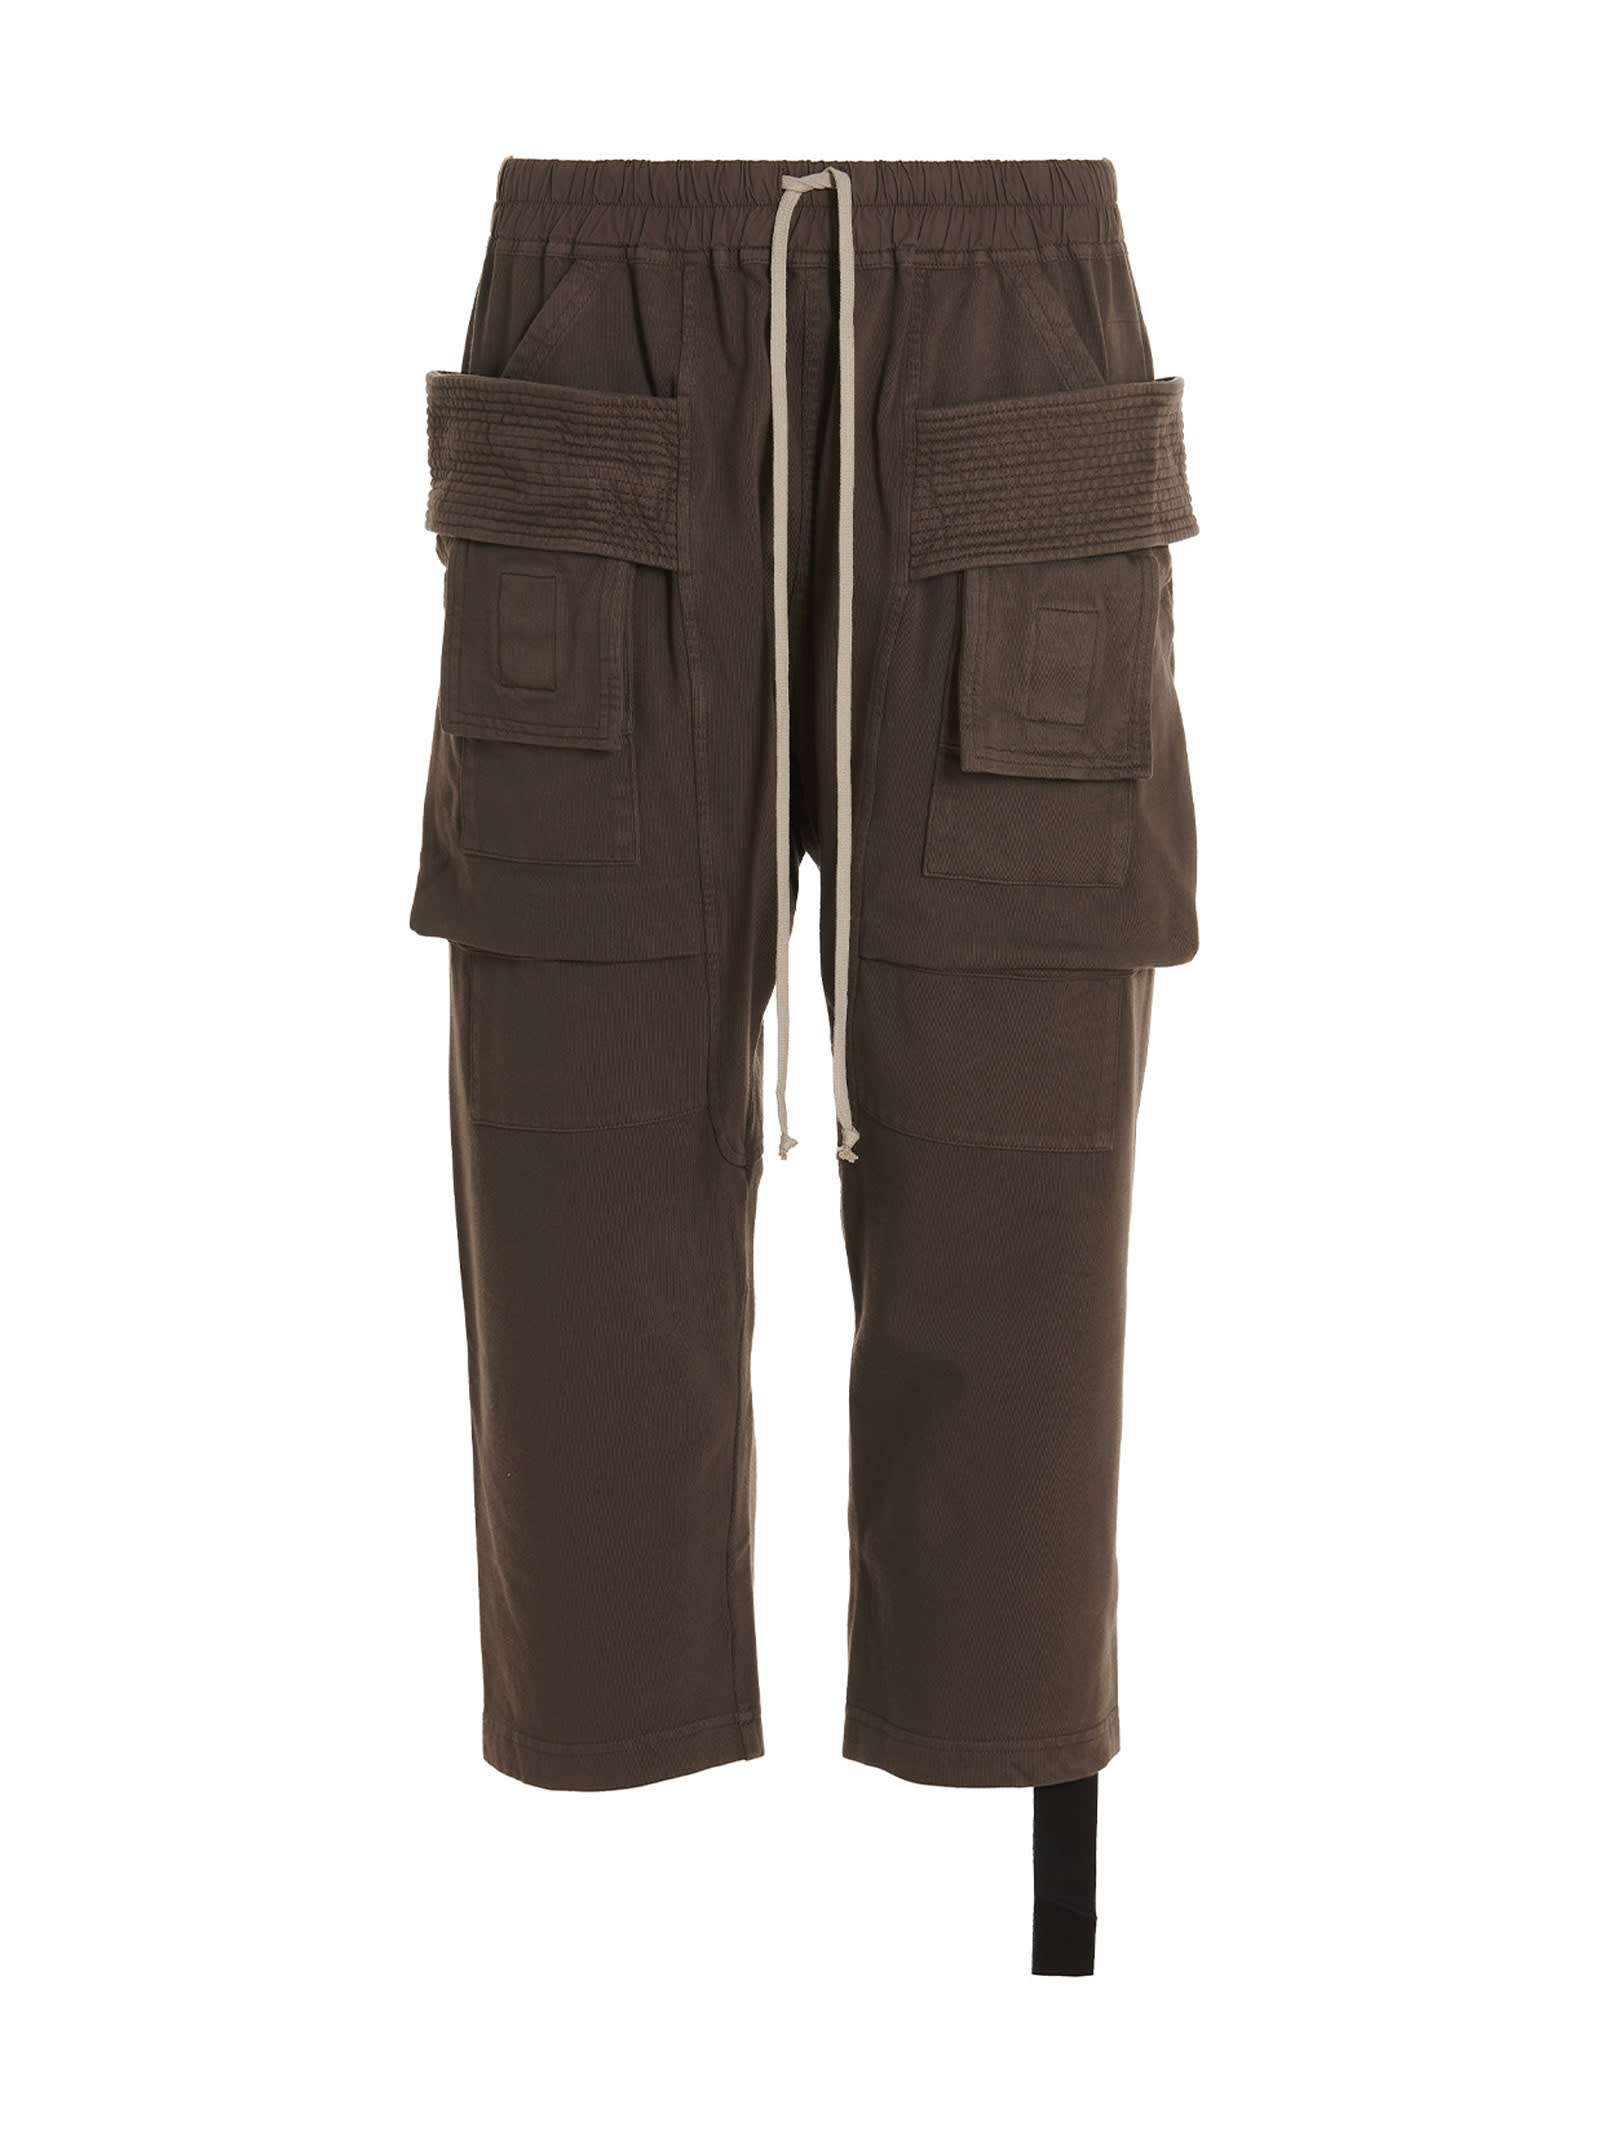 DRKSHDW CREATCH CARGO CROPPED DRAWSTRING PANTS